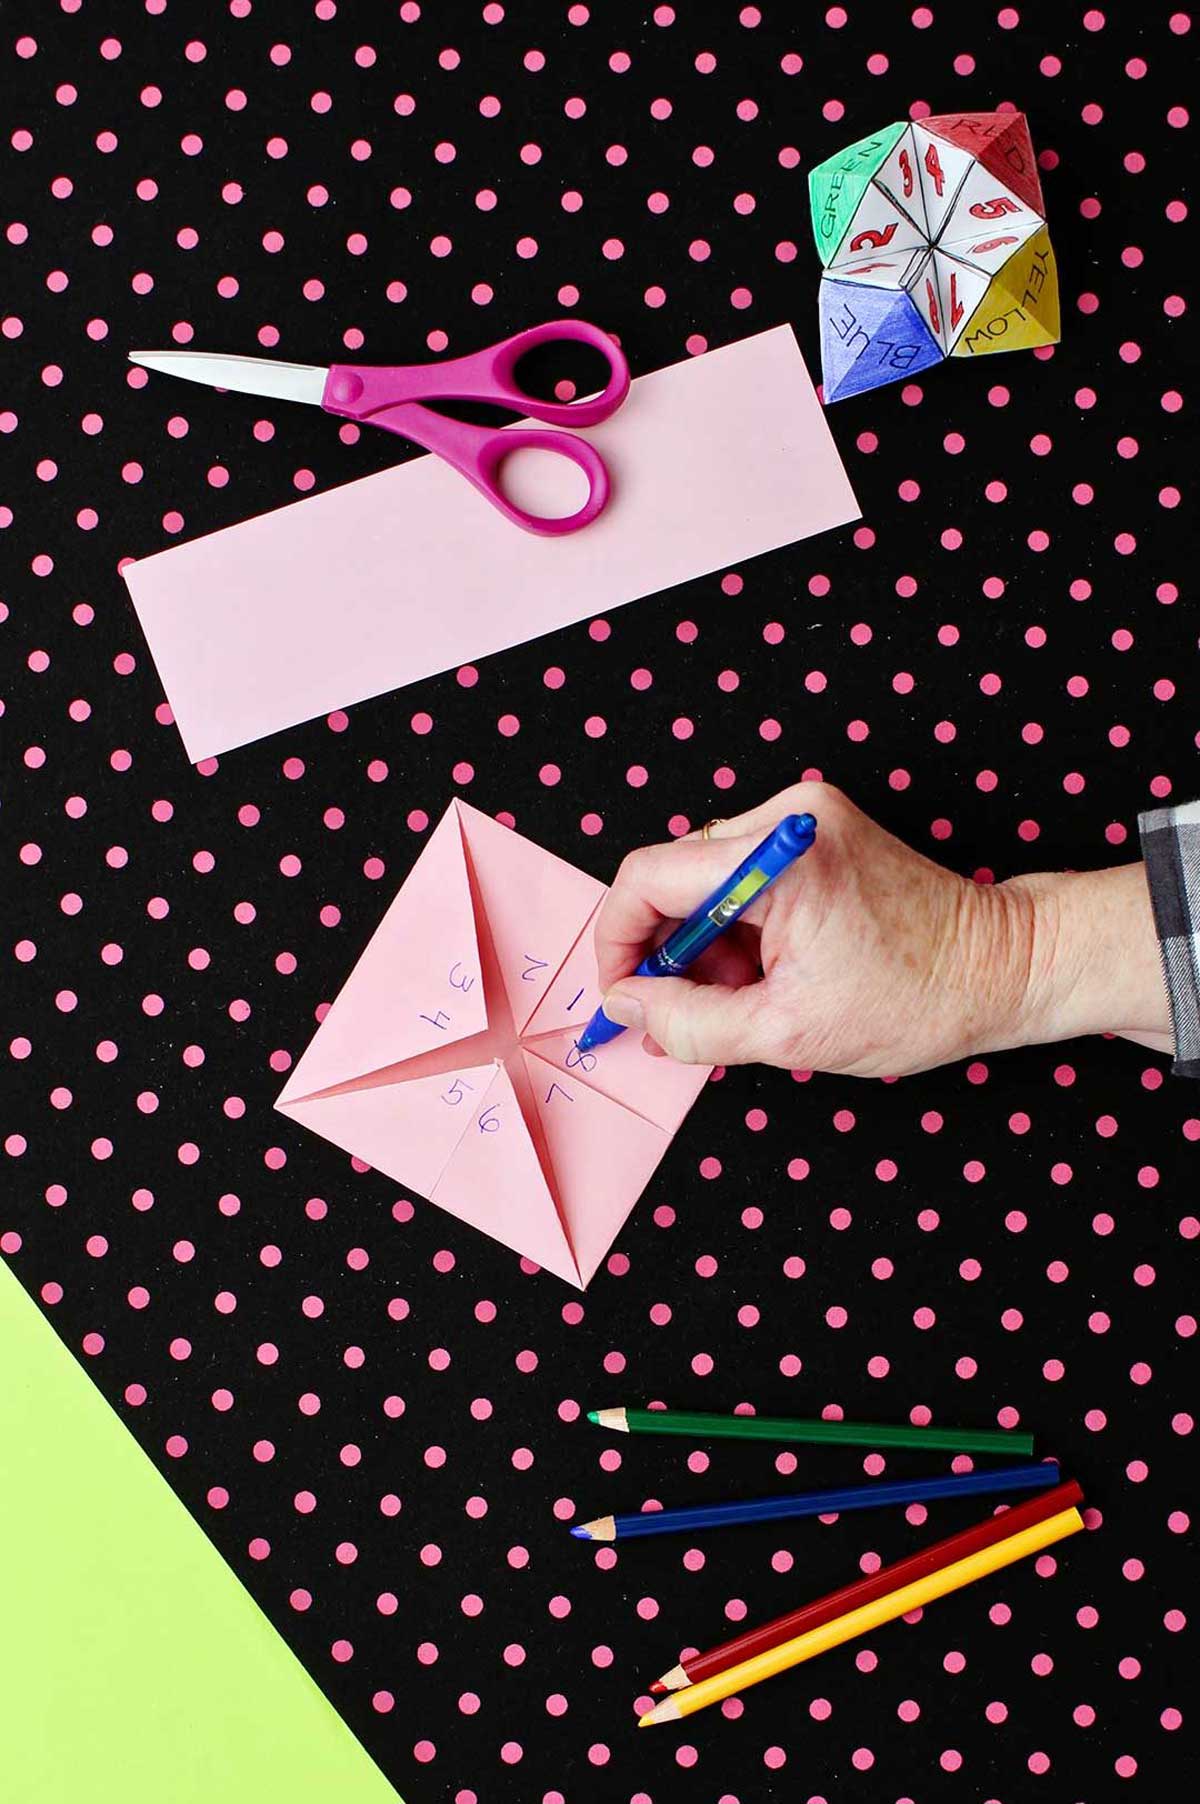 Opposite side of paper fortune teller made from pink paper showing numbers 1-8 with scissors and colored pencils laying on a black and pink polka dotted background.